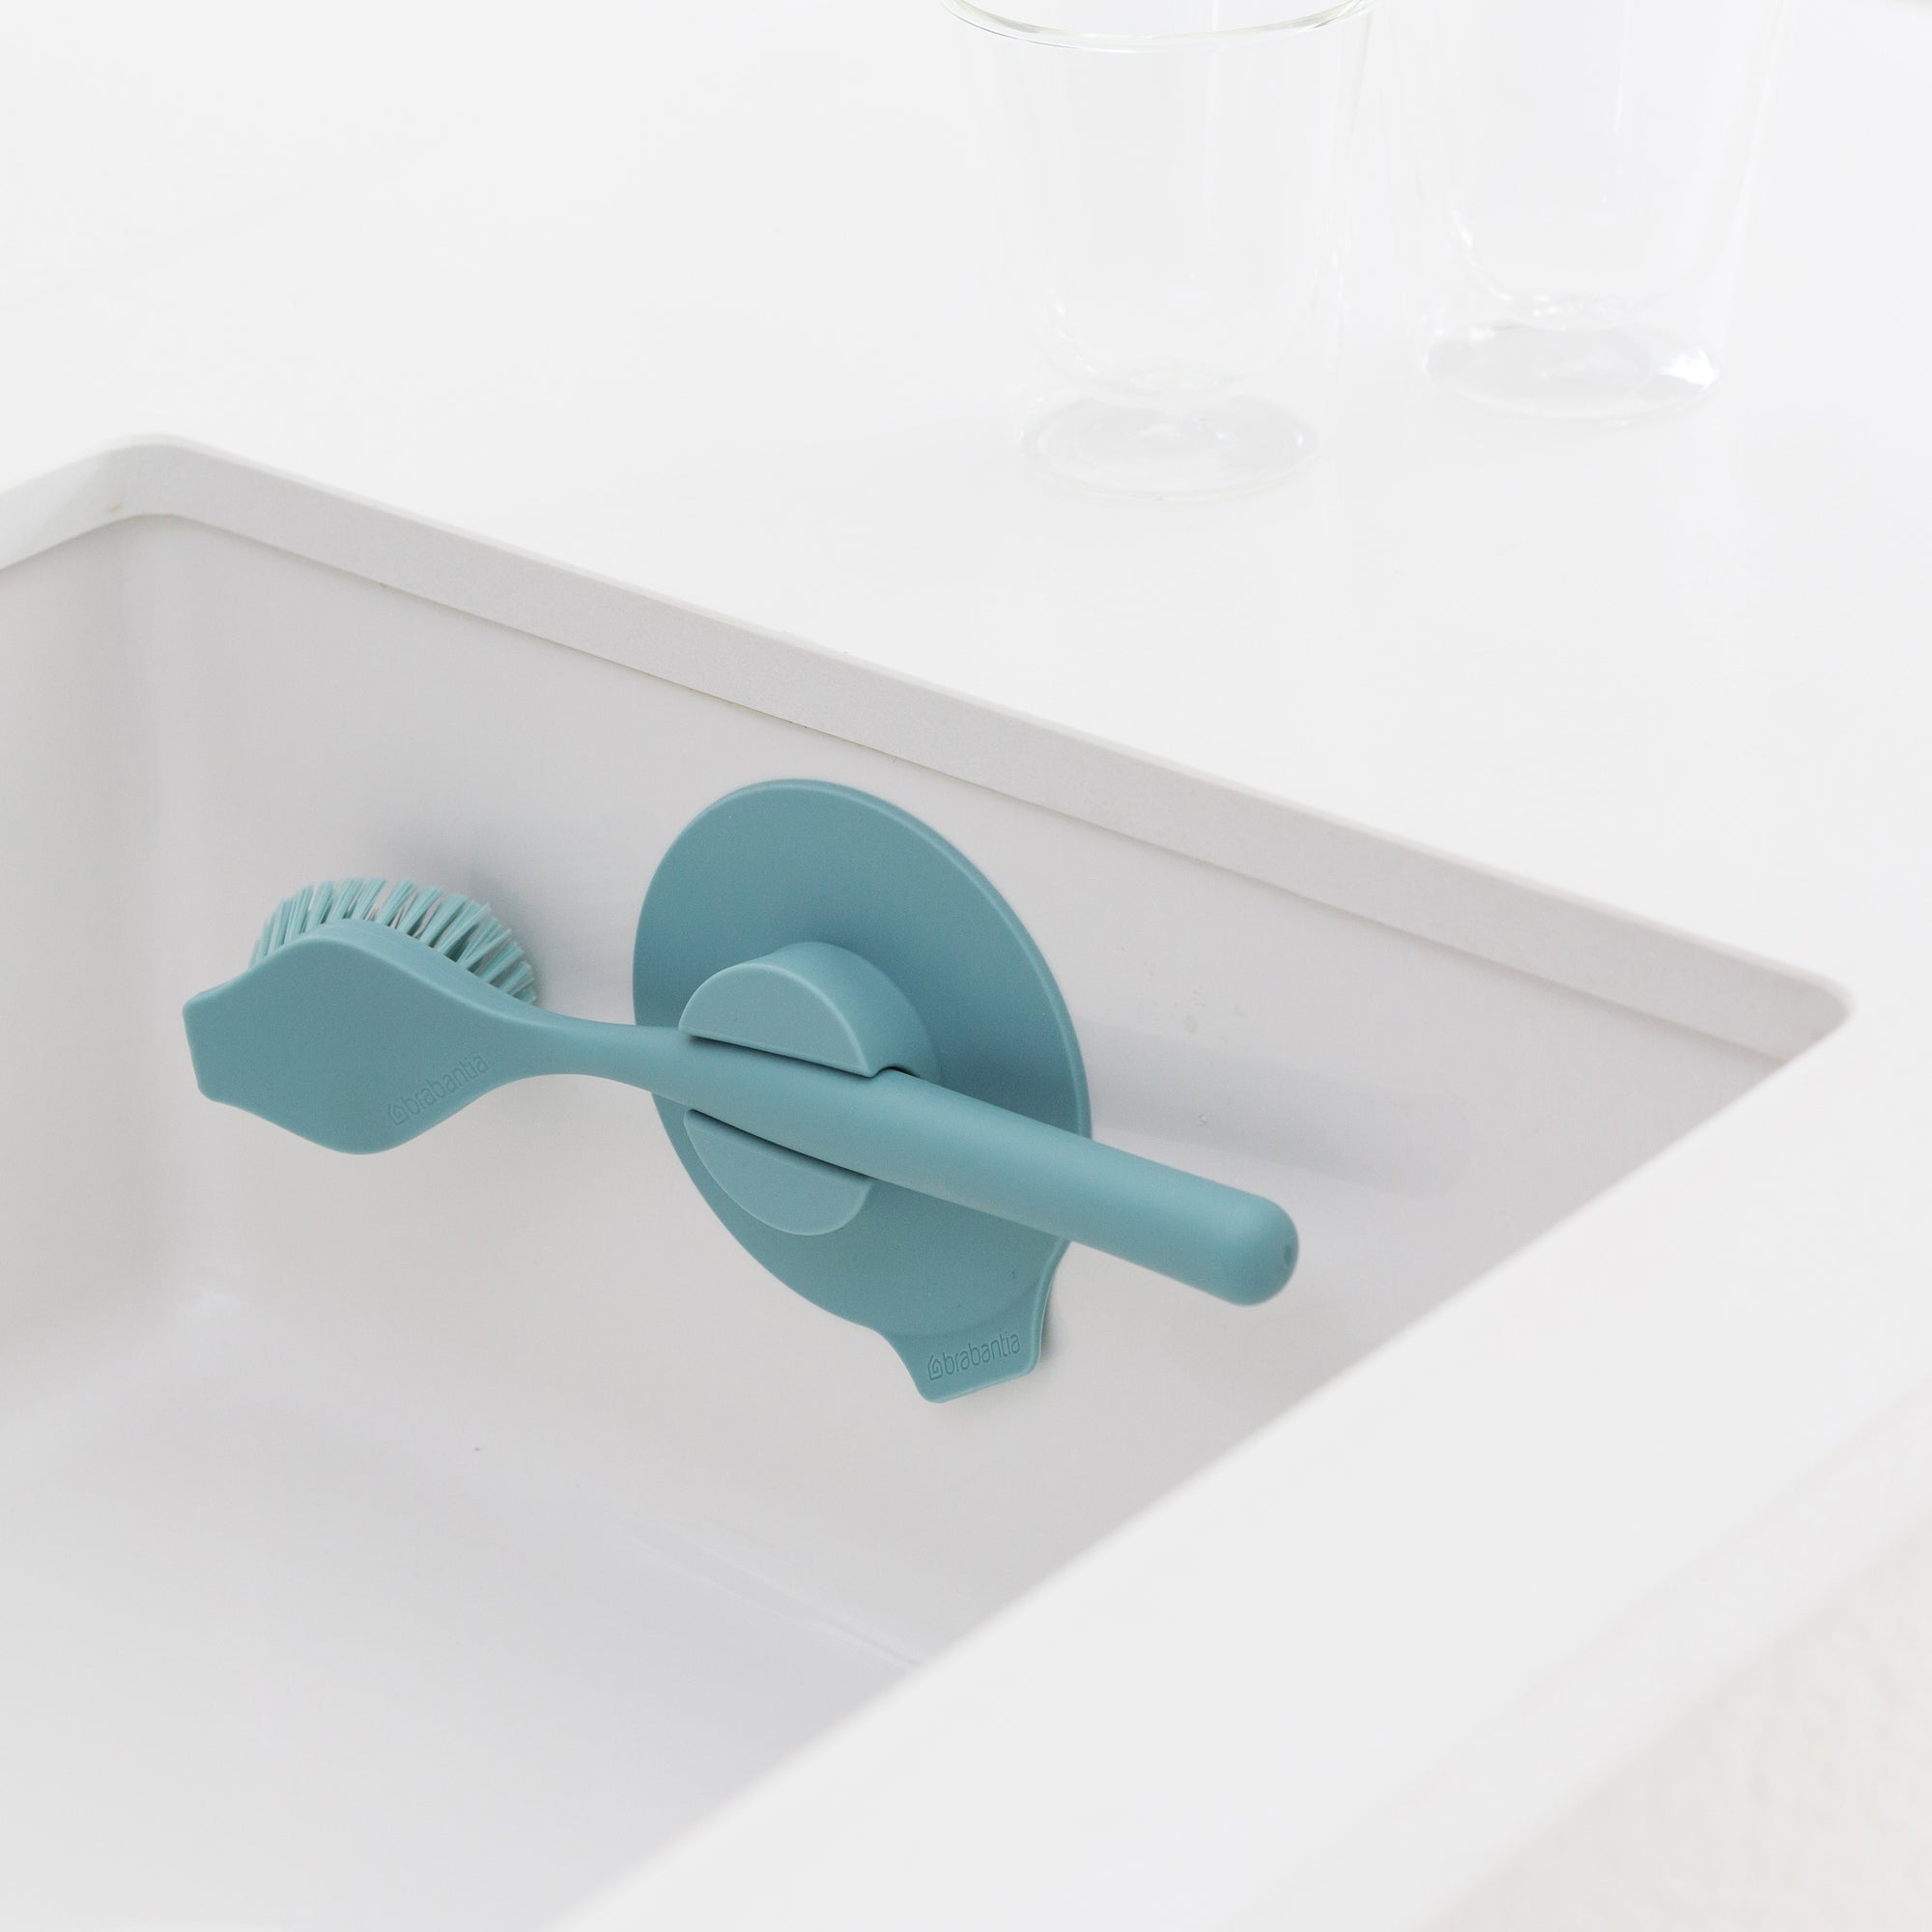 Brabantia Sinkside Mint Dish Brush With Suction Cup Holder Blue